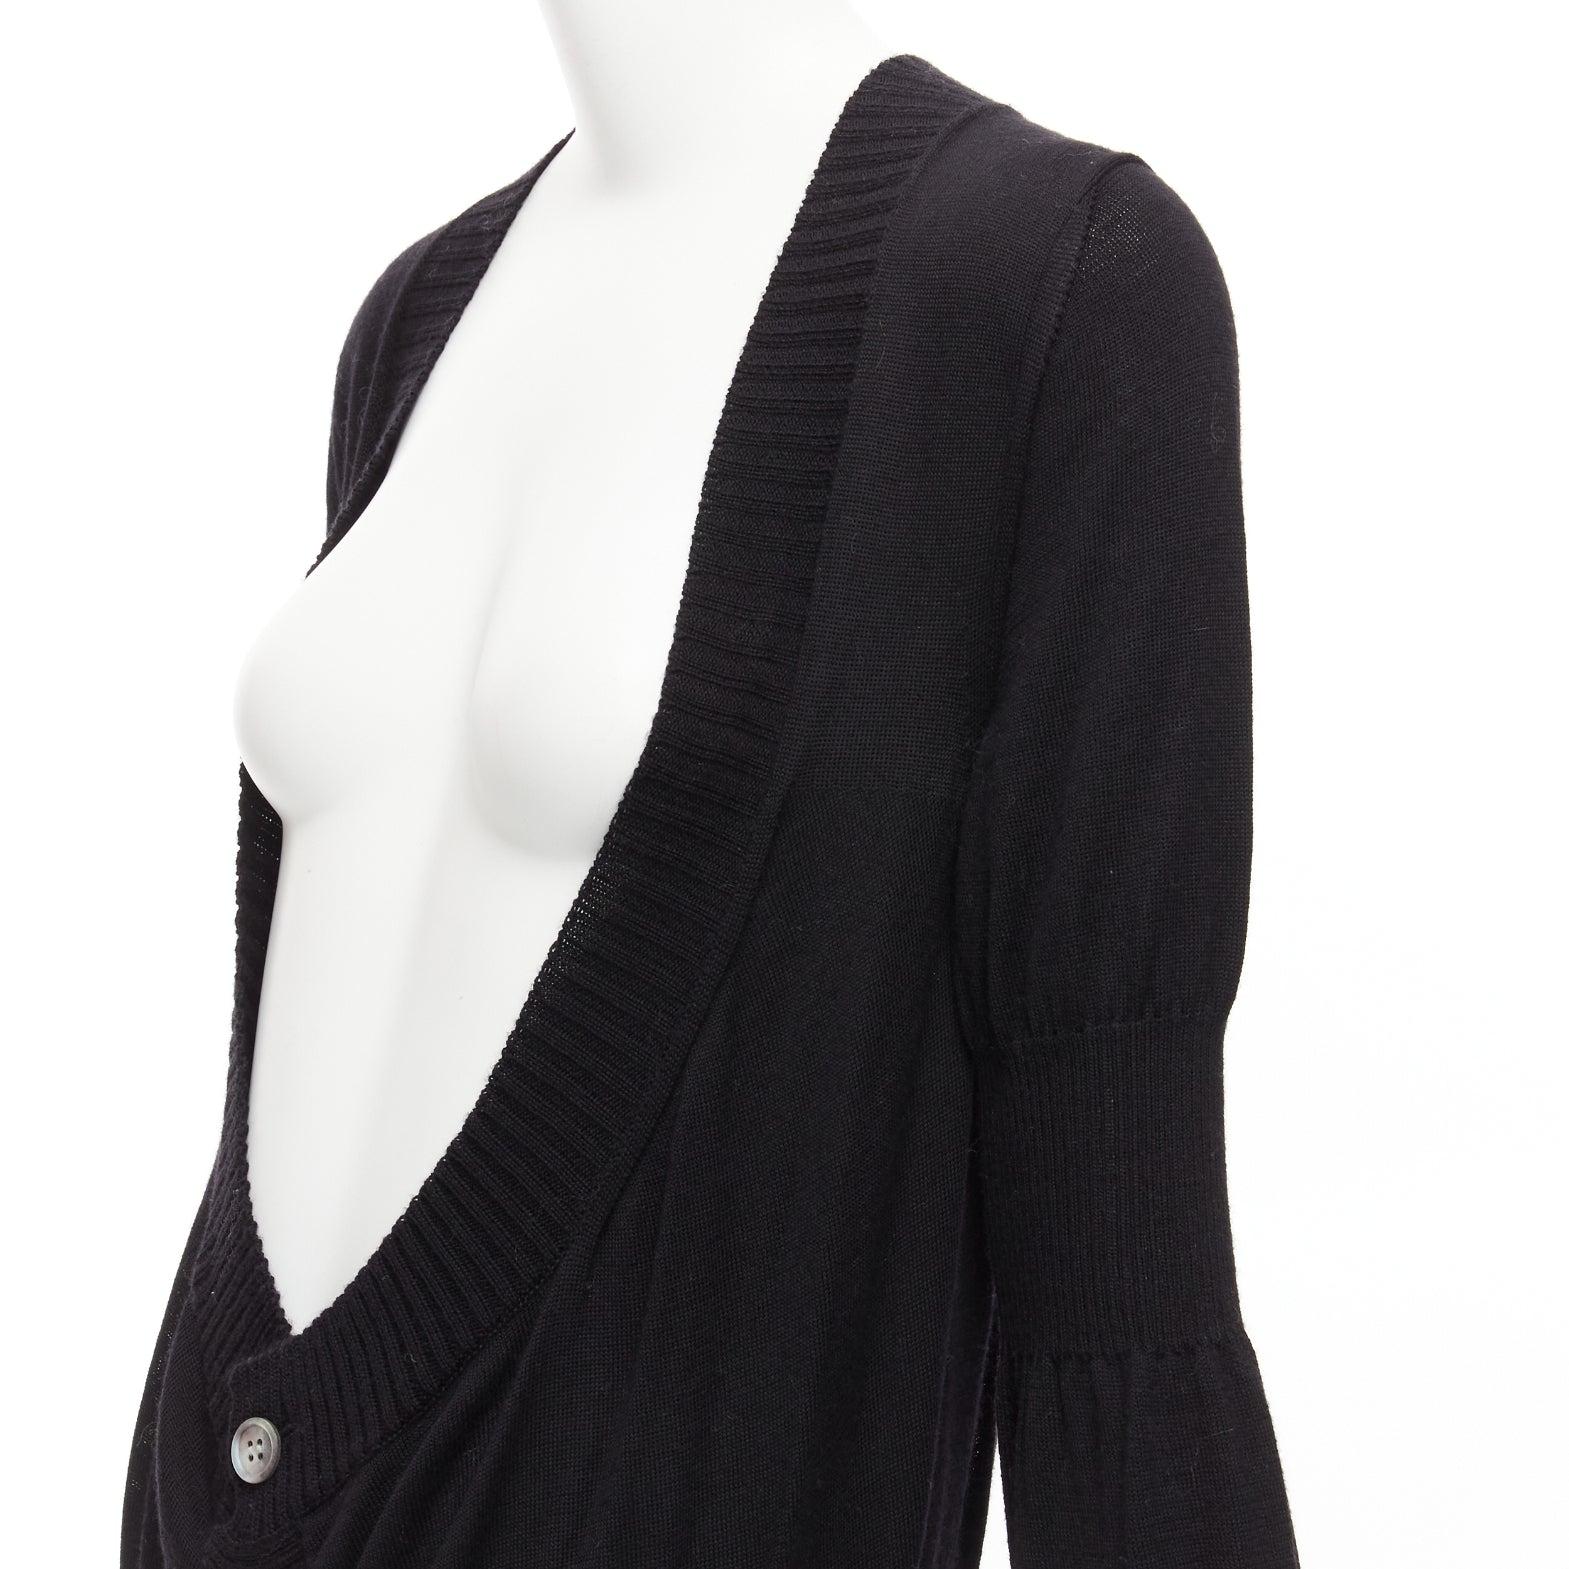 JUNYA WATANABE 2006 black wool low cut long button up cardigan sweater S For Sale 3